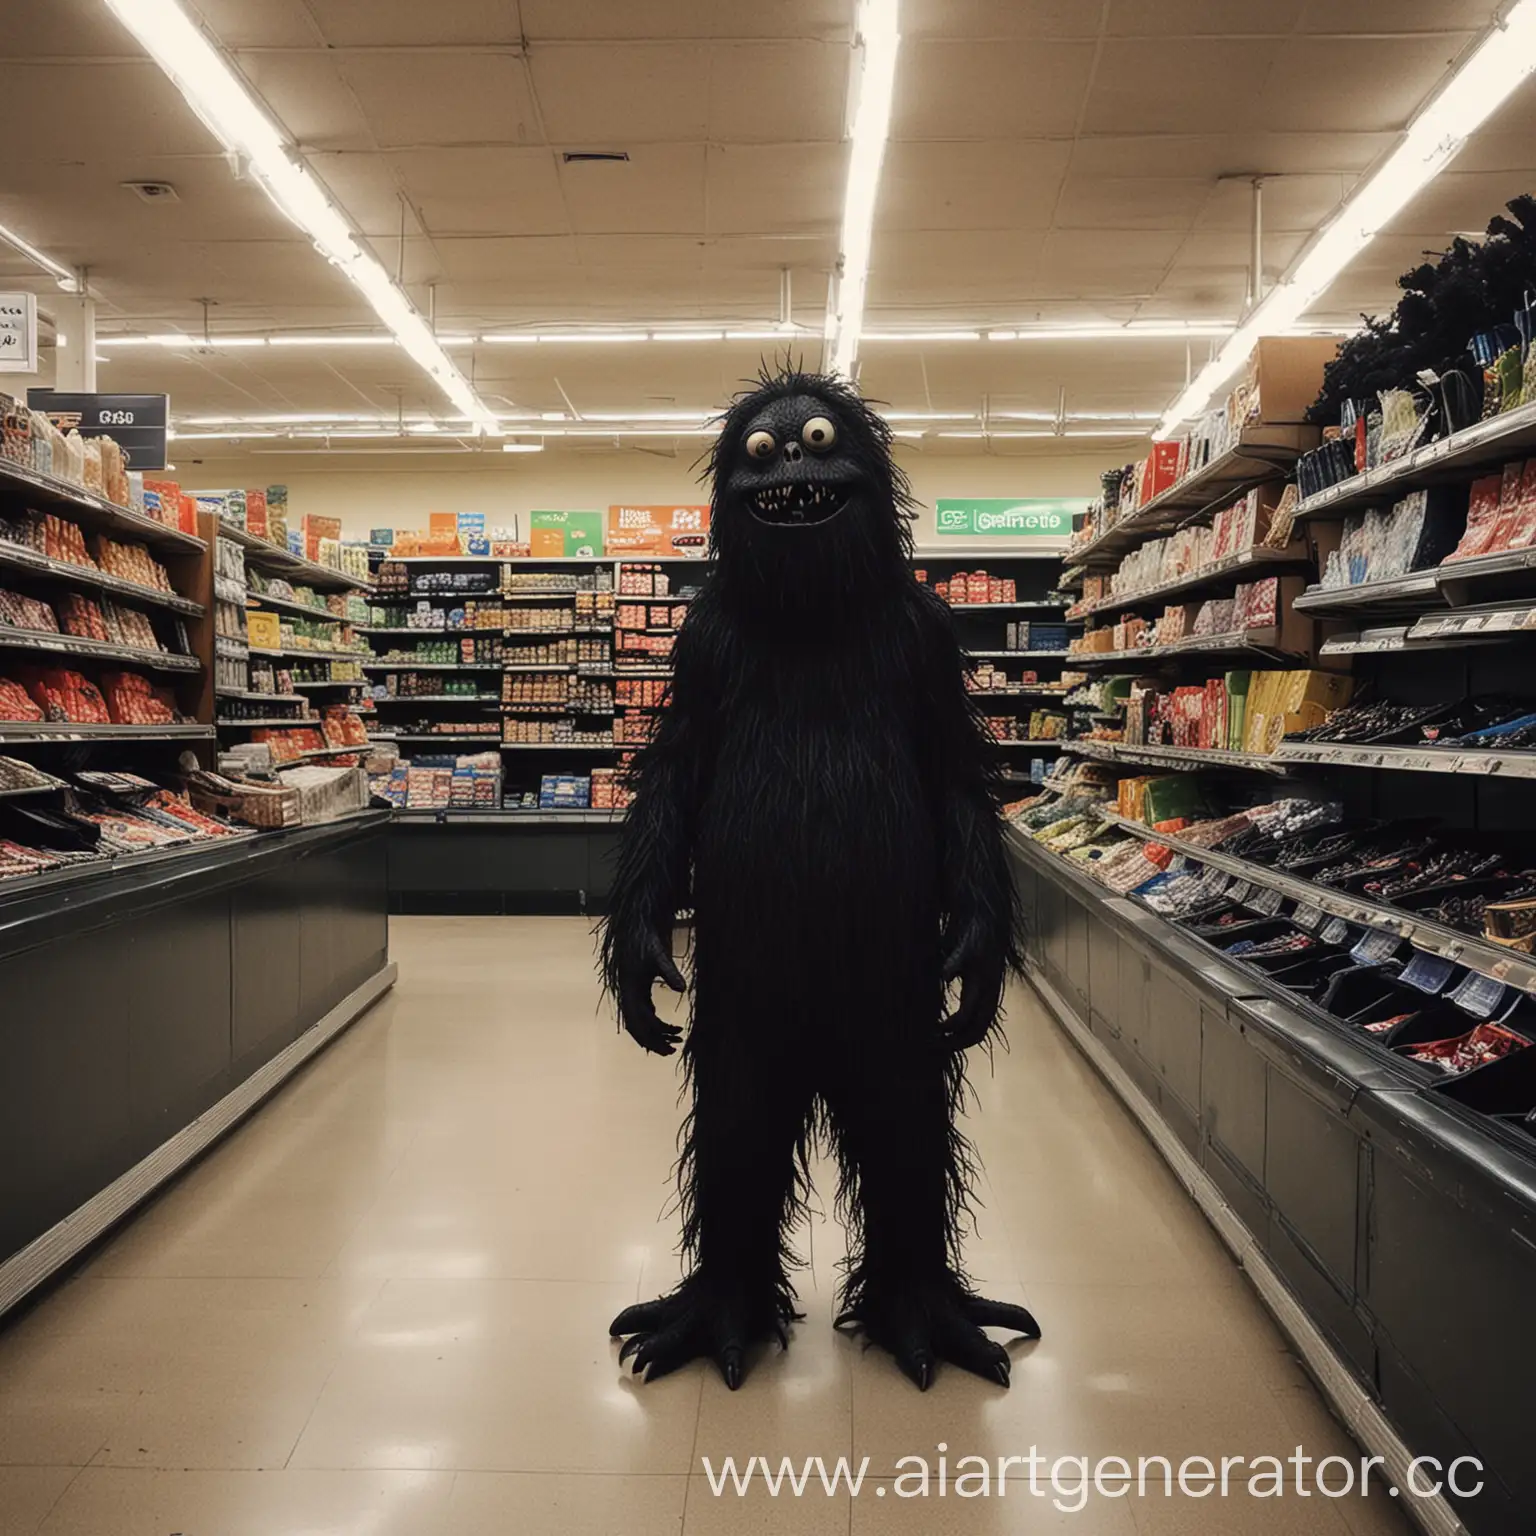 Eerie-Supermarket-Strange-Creatures-and-a-Lone-Visitor